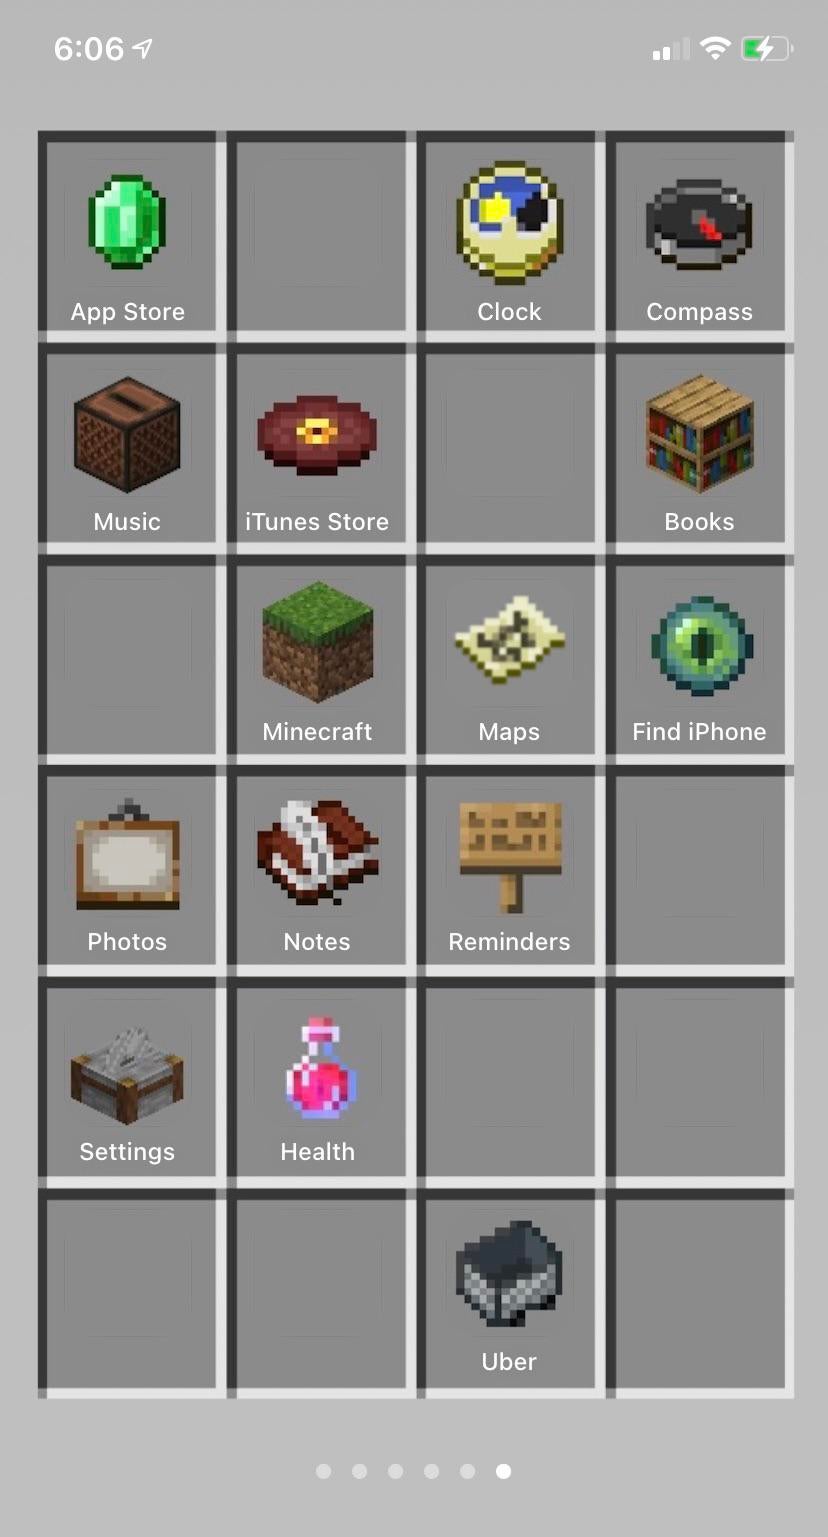 Minecraft Inventory Wallpaper, Minecraft inventory wallpaper for mobile phone, tablet, desktop computer and other devices